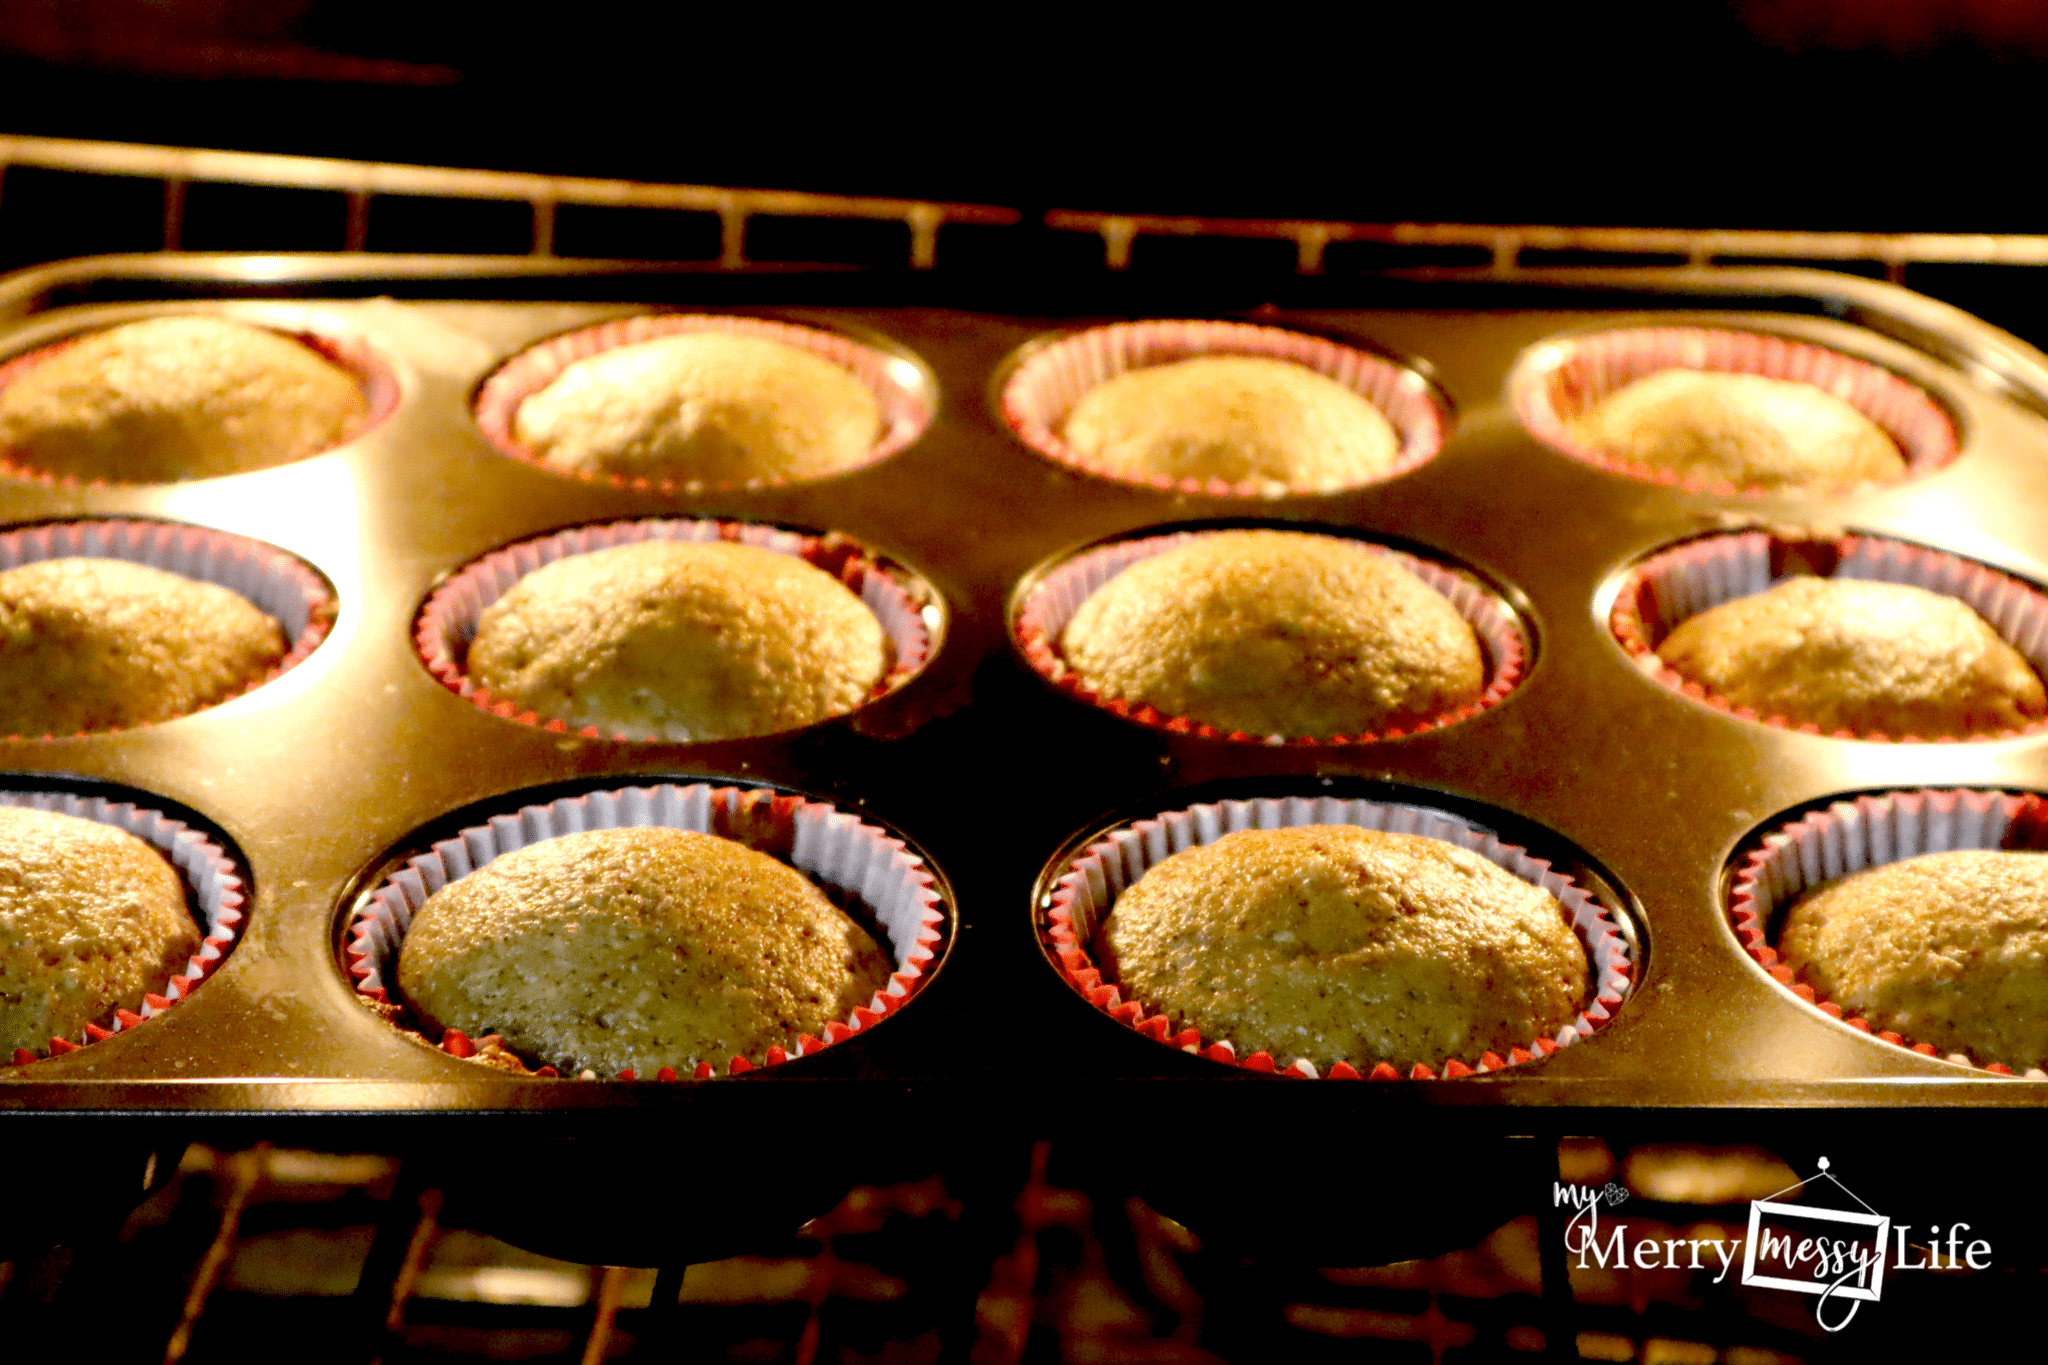 Hearty Banana Flax Muffins Recipe baking in the oven